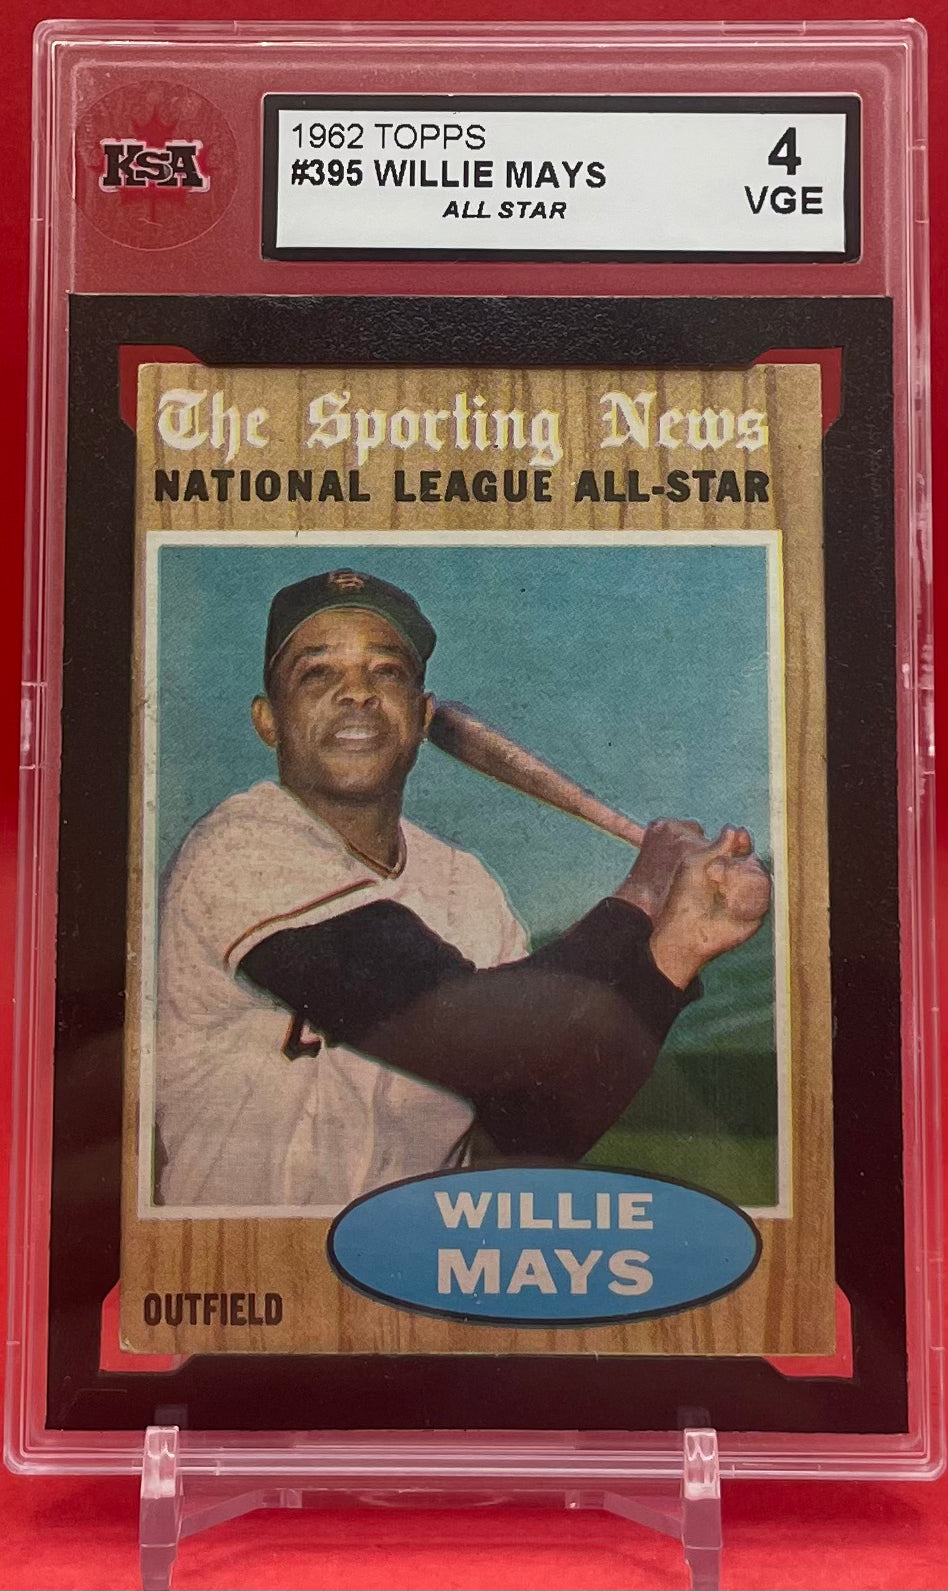 1962 TOPPS WILLIE MAYS